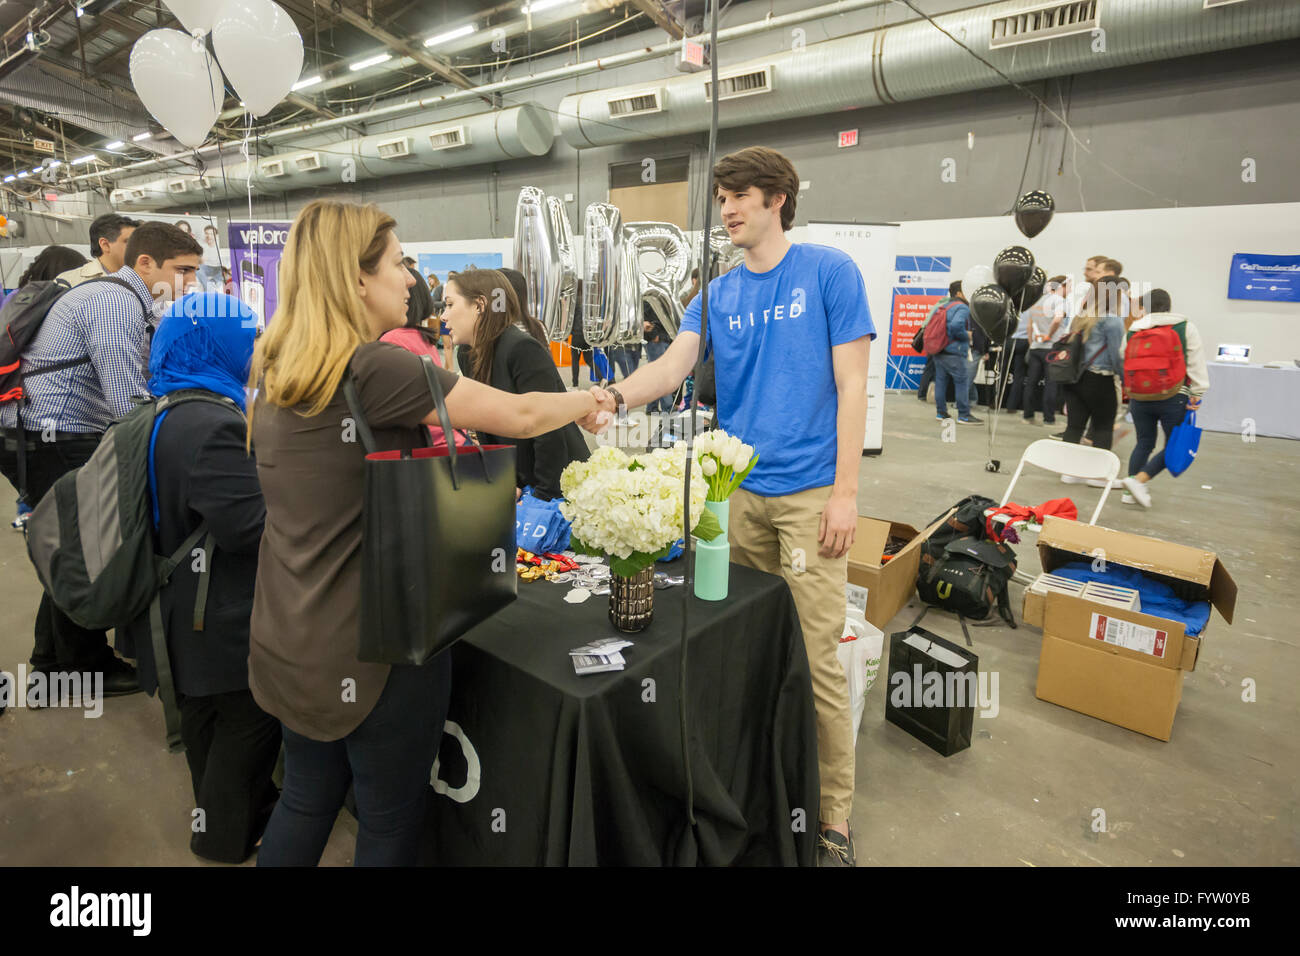 Worker from Hired greets a job seeker at the TechDay New York event on Thursday, April 21, 2016. Thousands attended to seek jobs with the startups and to network with their peers. TechDay bills itself as the world's largest startup event with over 300 exhibitors. (© Richard B. Levine) Stock Photo